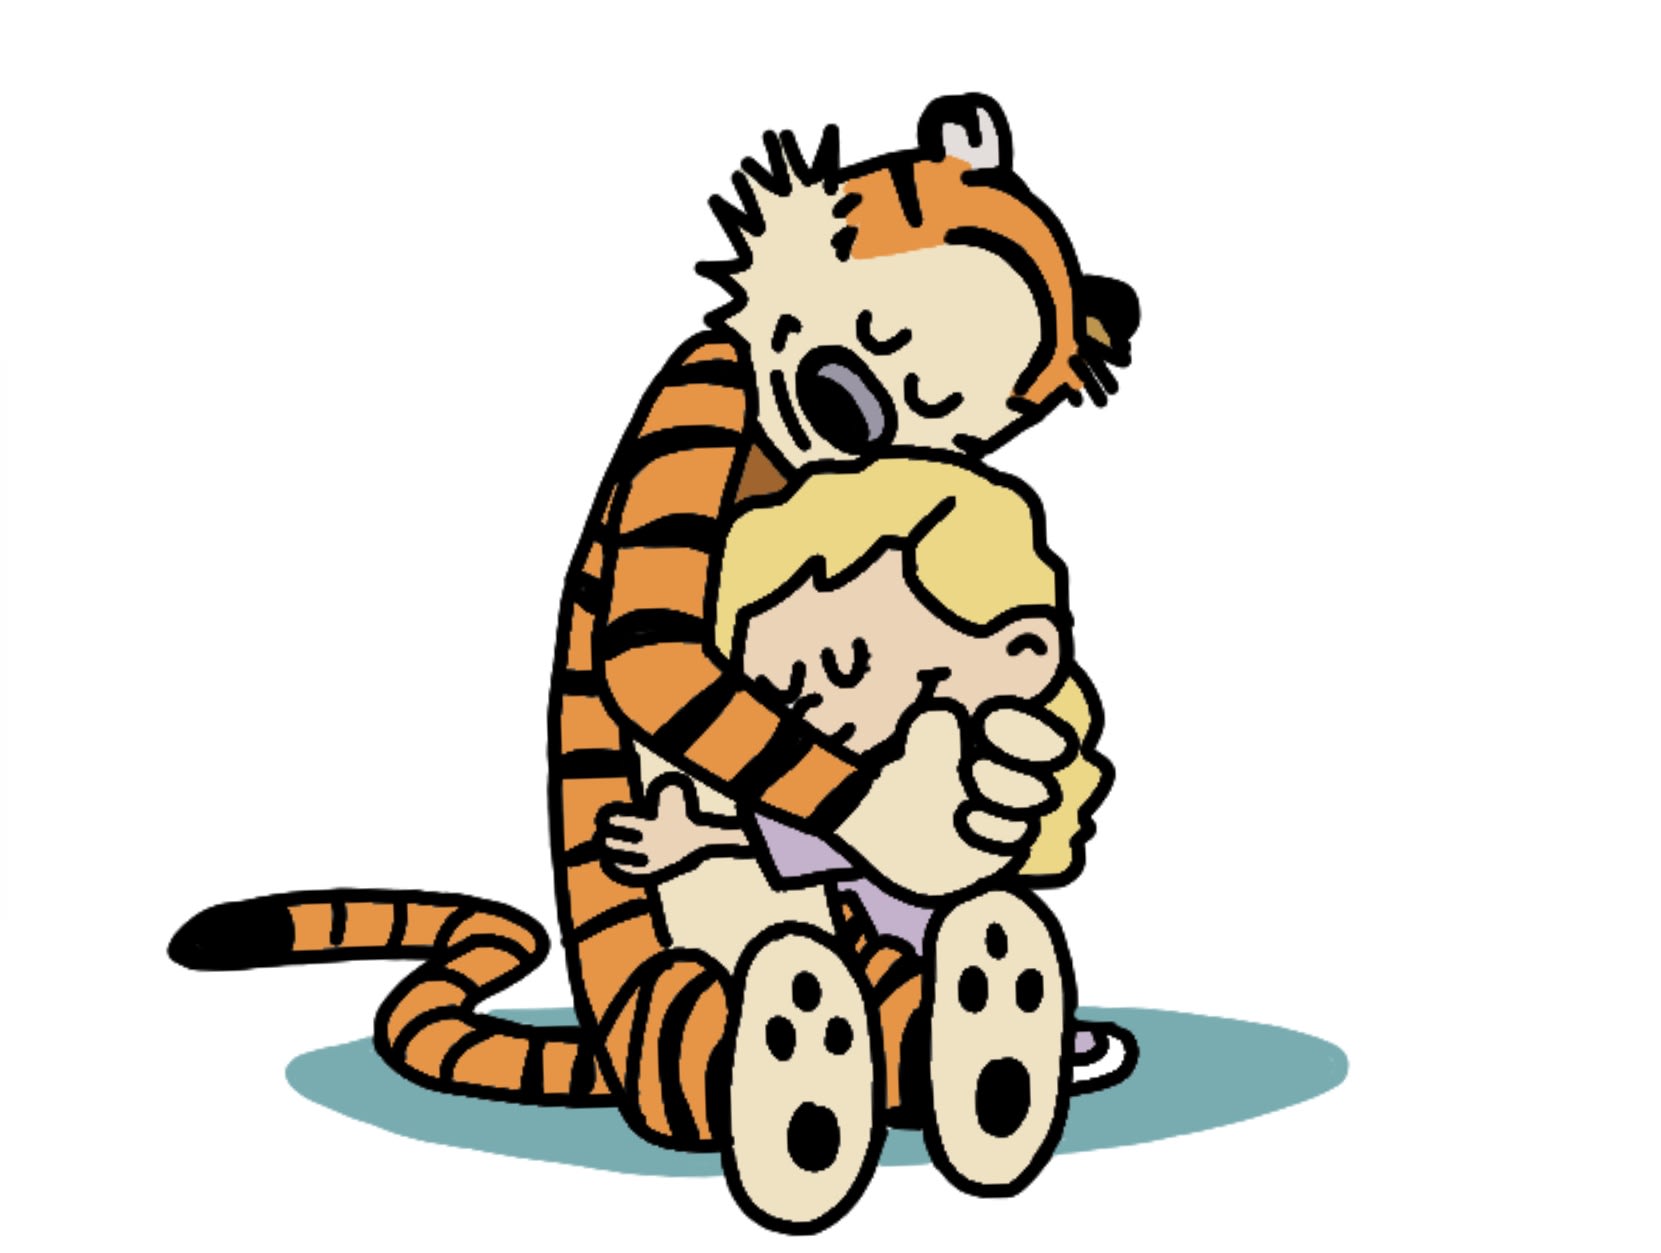 Draw you as a calvin and hobbes character by Wfayec | Fiverr